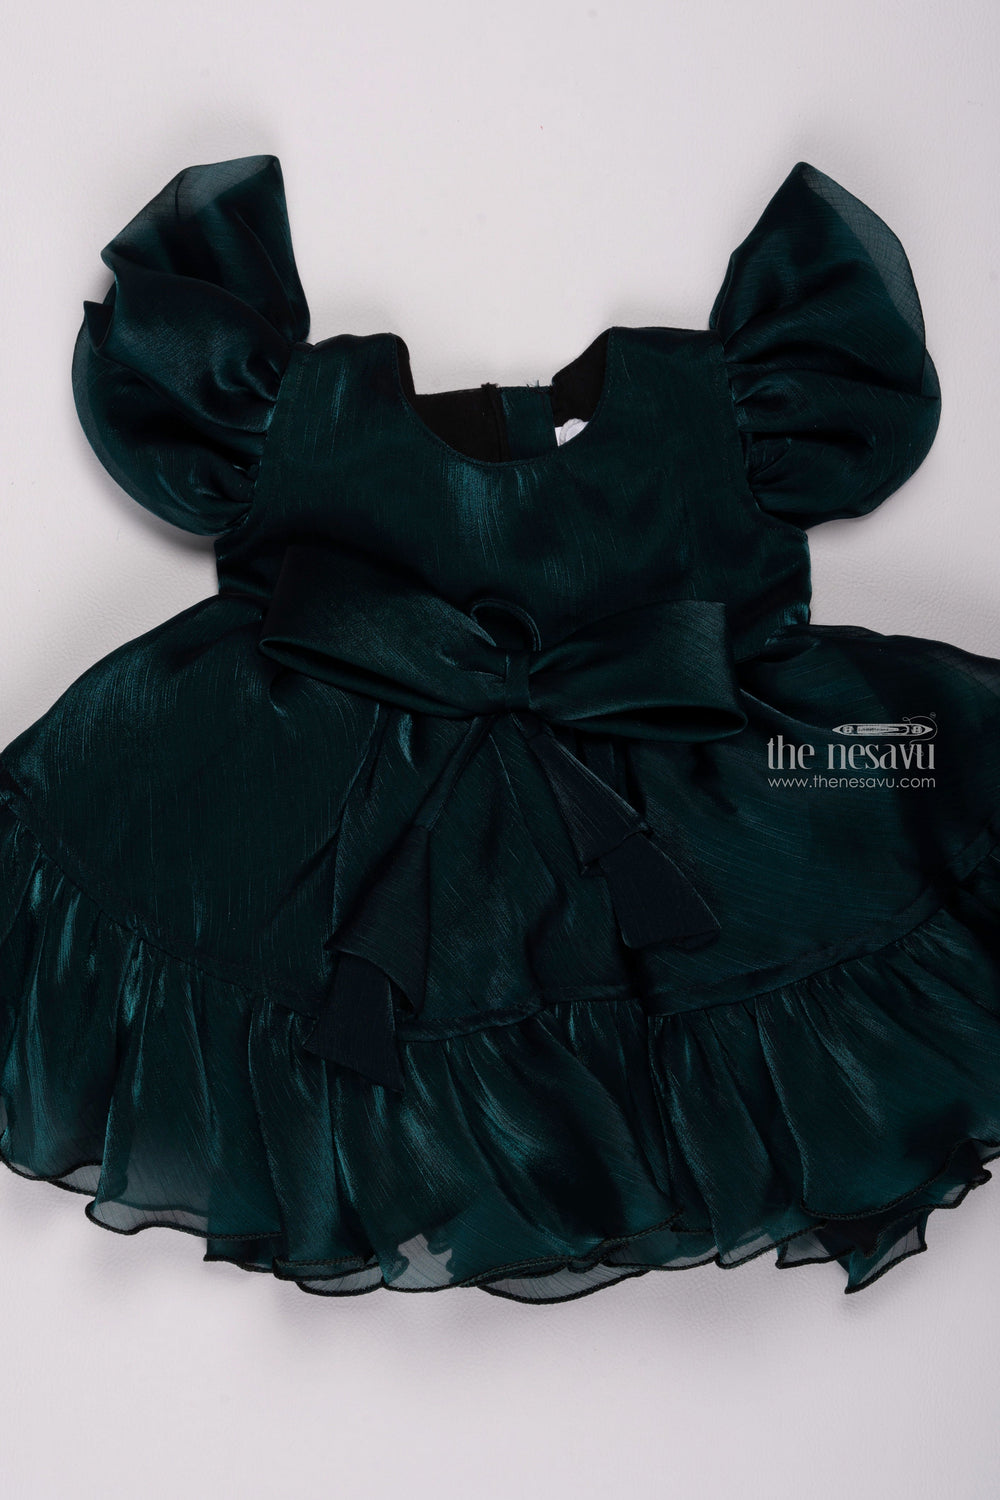 The Nesavu Girls Fancy Party Frock Azure Elegance: Girls' Organza Party Frock Adorned with Bow Applique Nesavu Exclusive First Birthday Baby Frock Styles | Elegant Dresses for Little Girls | The Nesavu